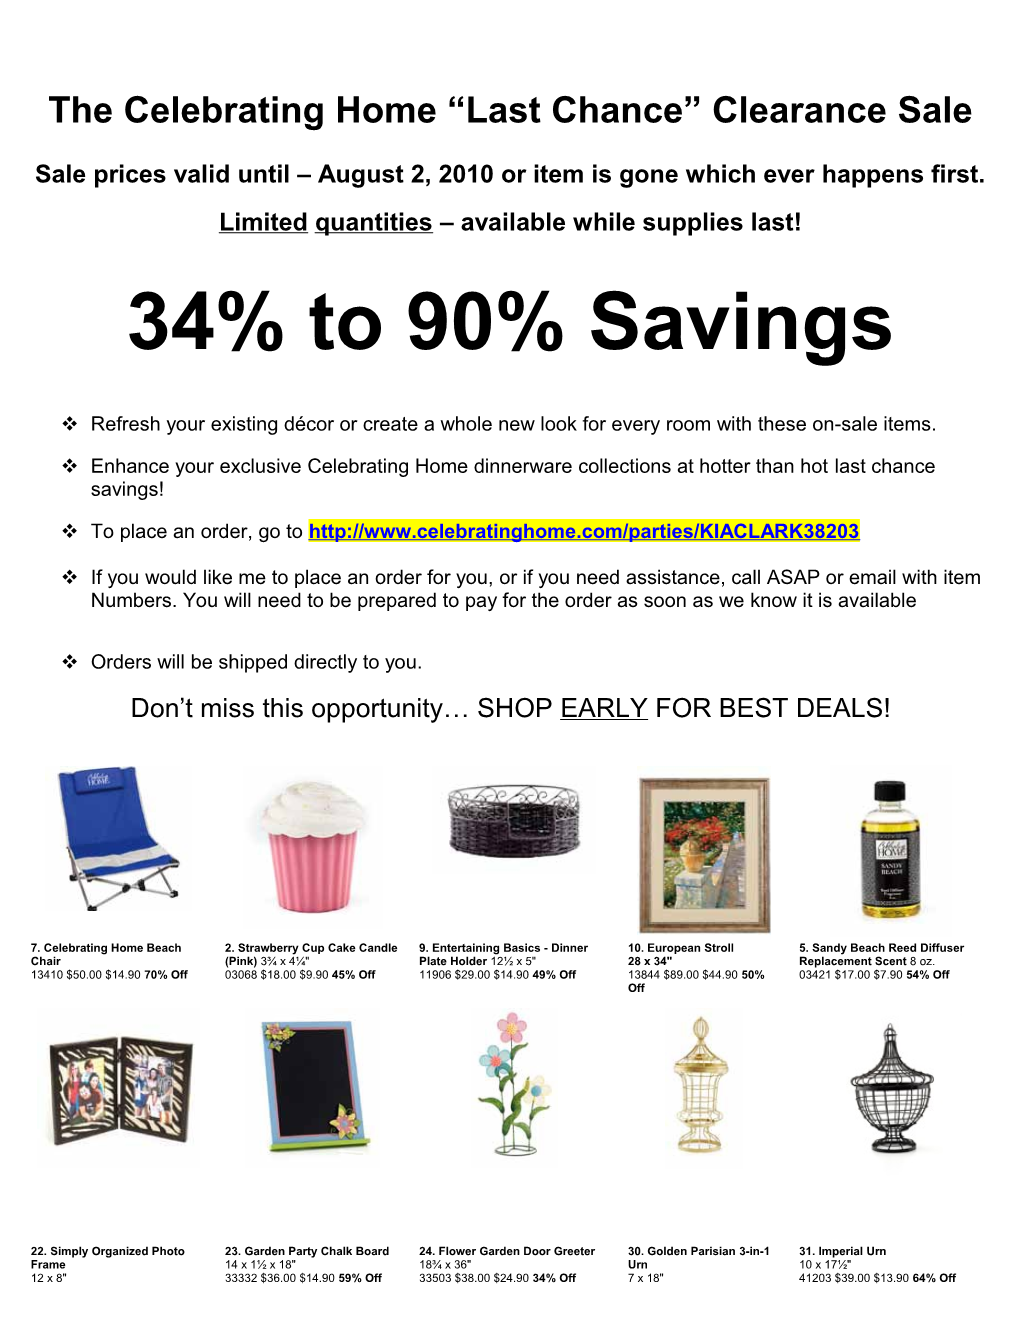 The Celebrating Home Last Chance Clearance Sale